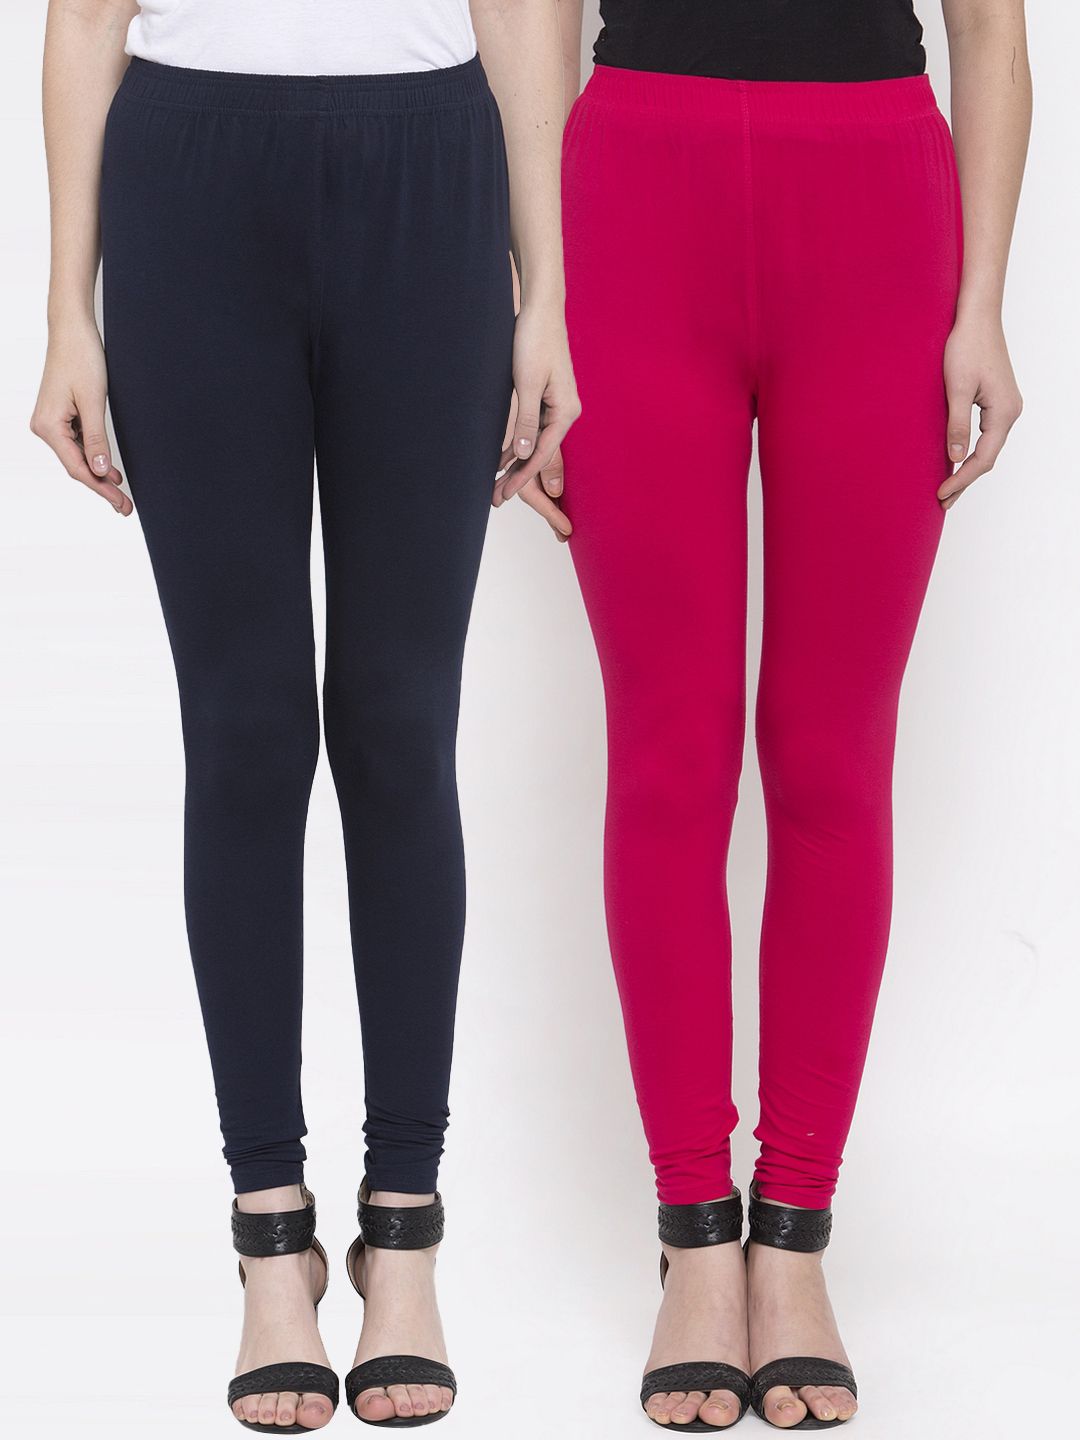 TAG 7 Women Pack Of 2 Ankle-Length Leggings Price in India